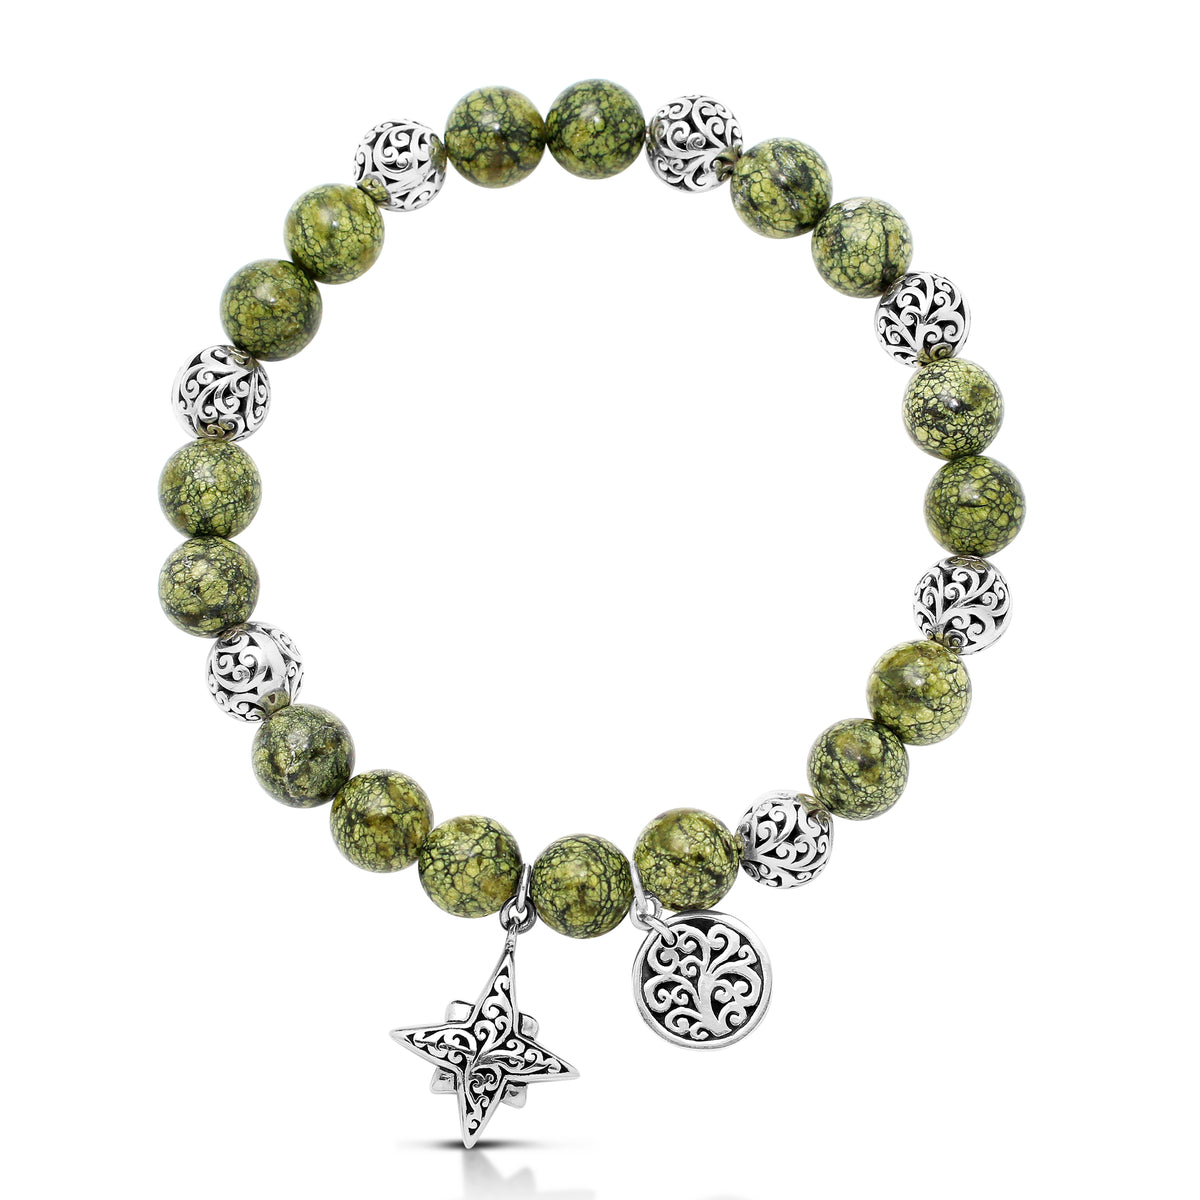 Green Turquoise Bead (8mm) with Scroll Sterling Silver Bead and Star-Bright Hang Stretch Bracelet